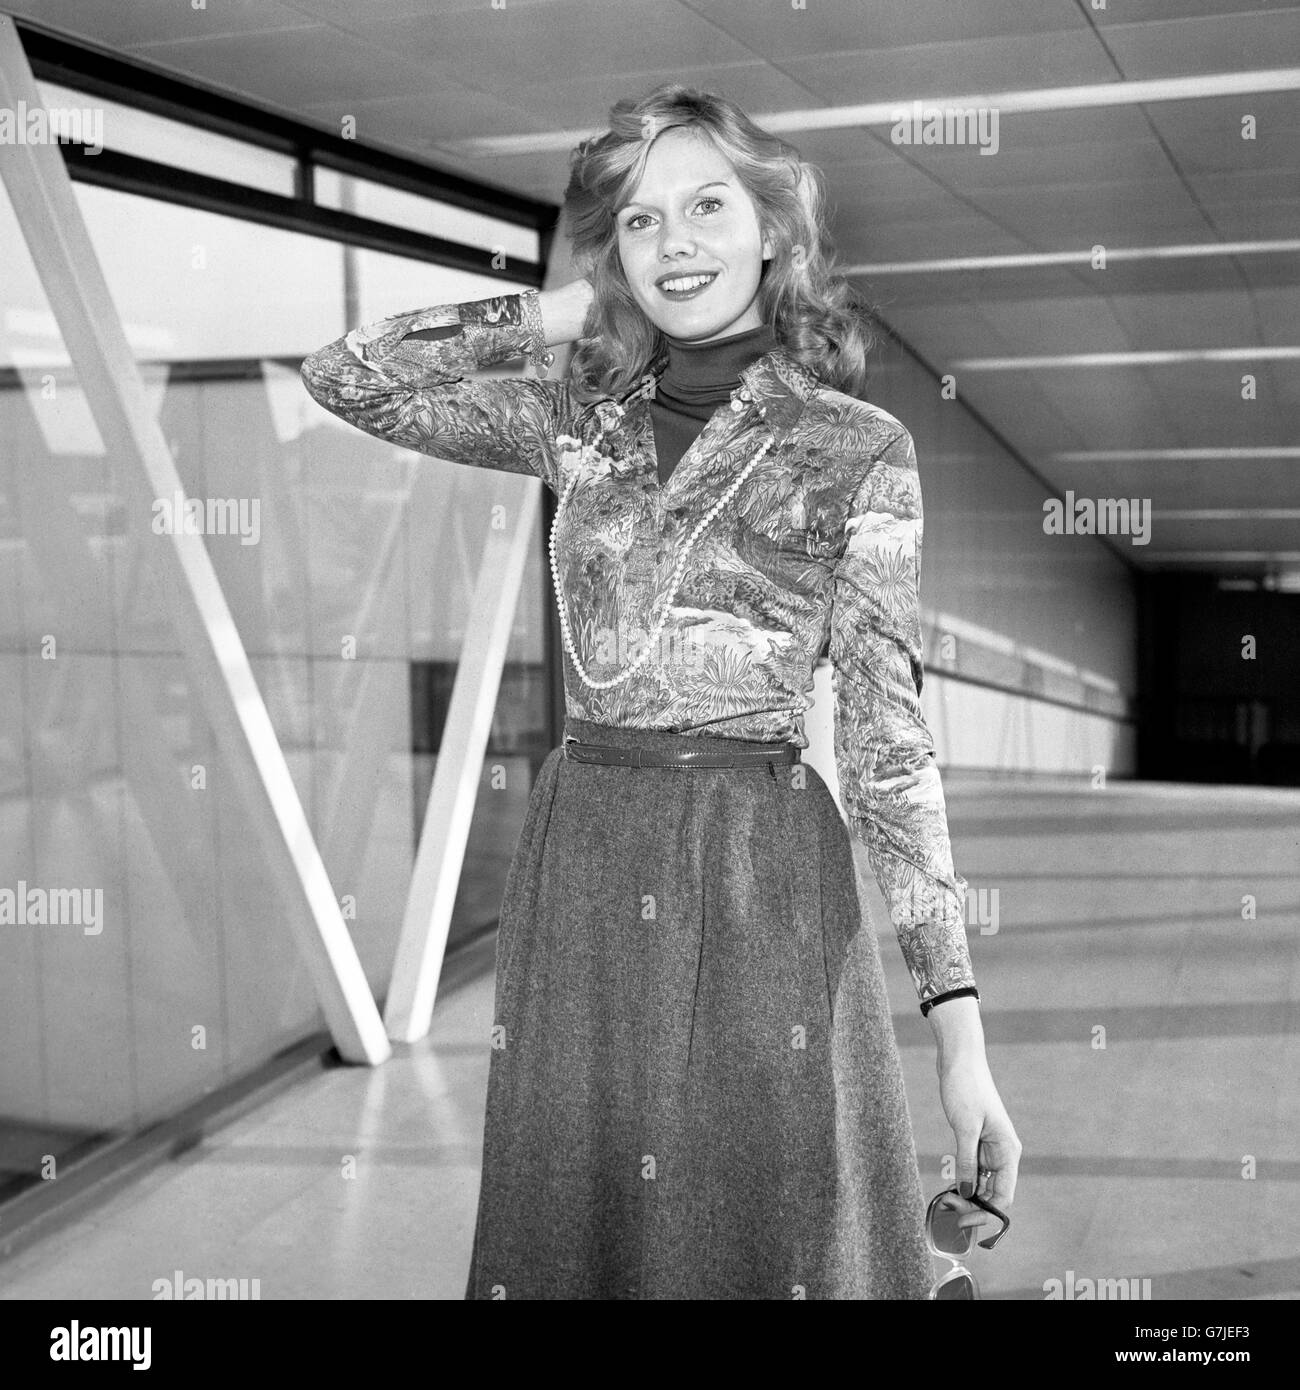 Miss Sweden Agneta Magnusson 20 Arrives At London S Heathrow Aiport To Take Part In The Miss